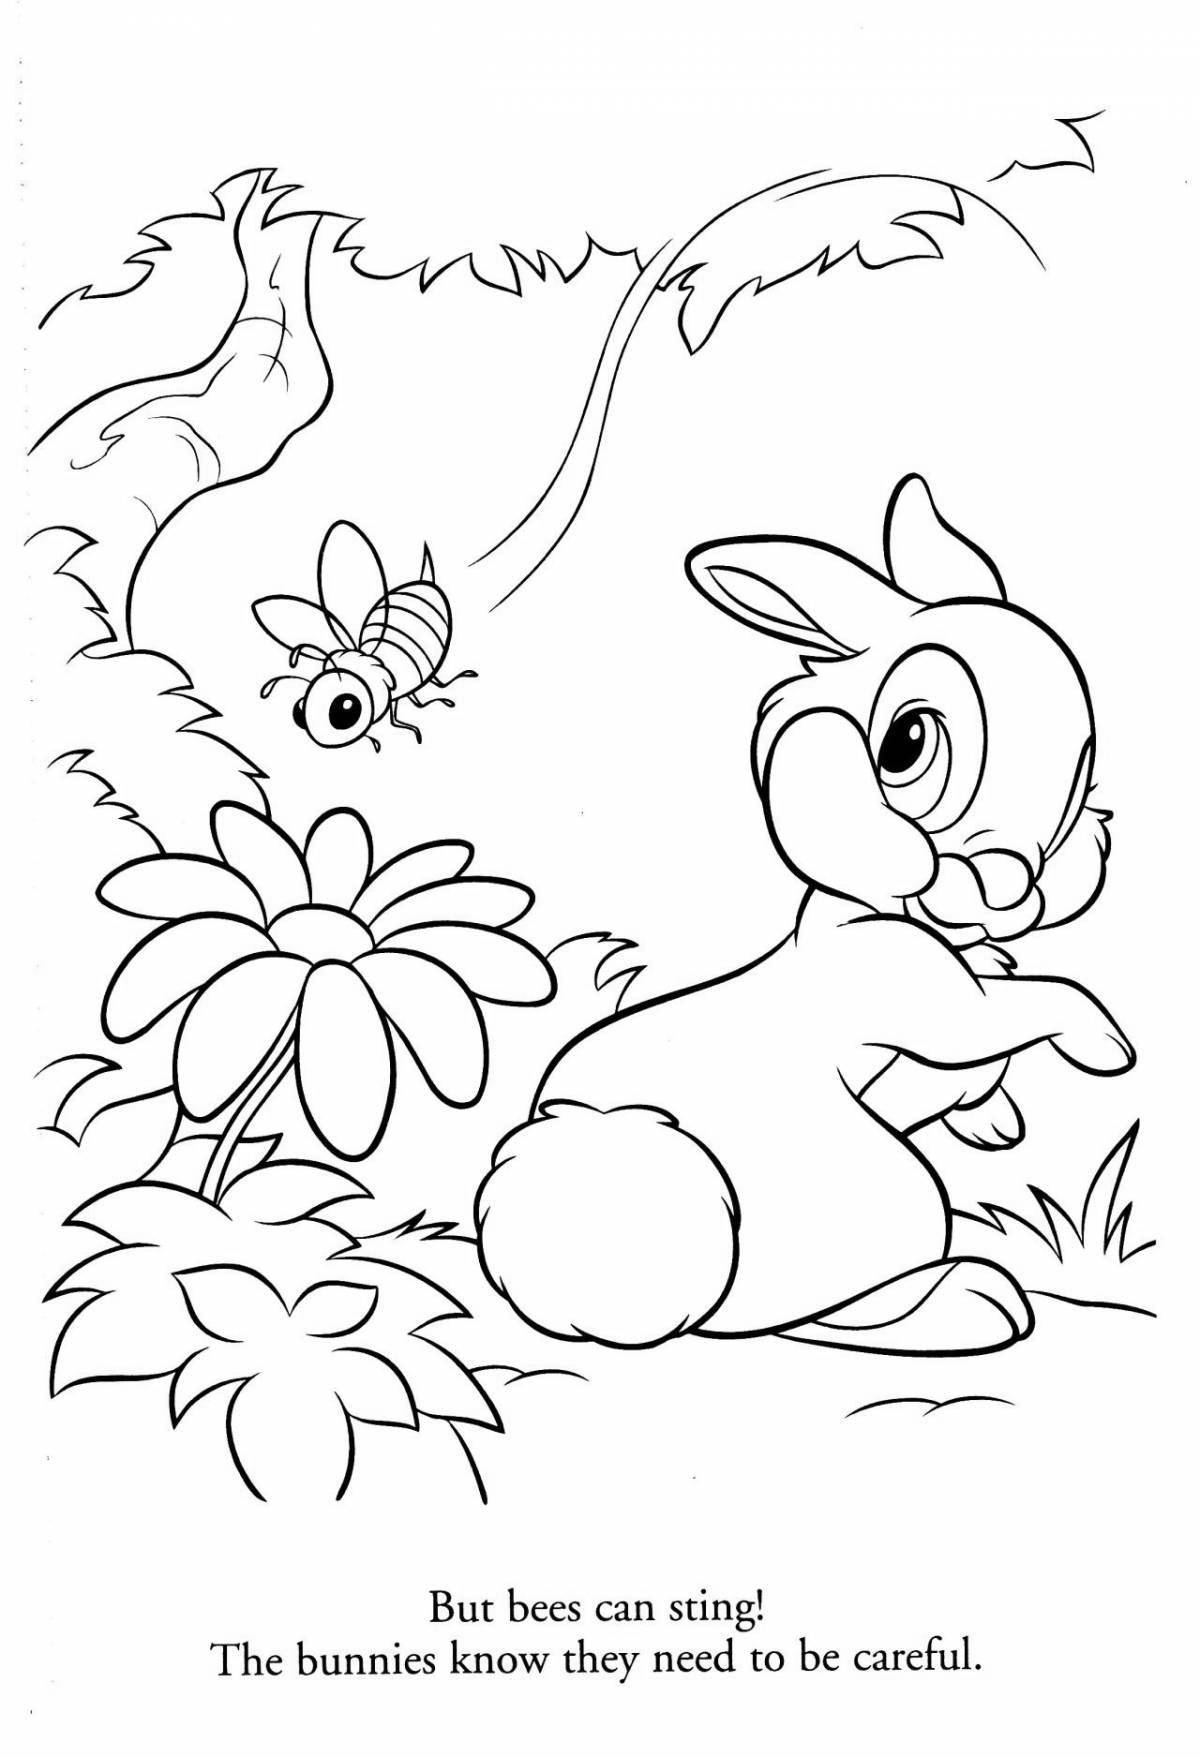 Rabbit and squirrel coloring pages